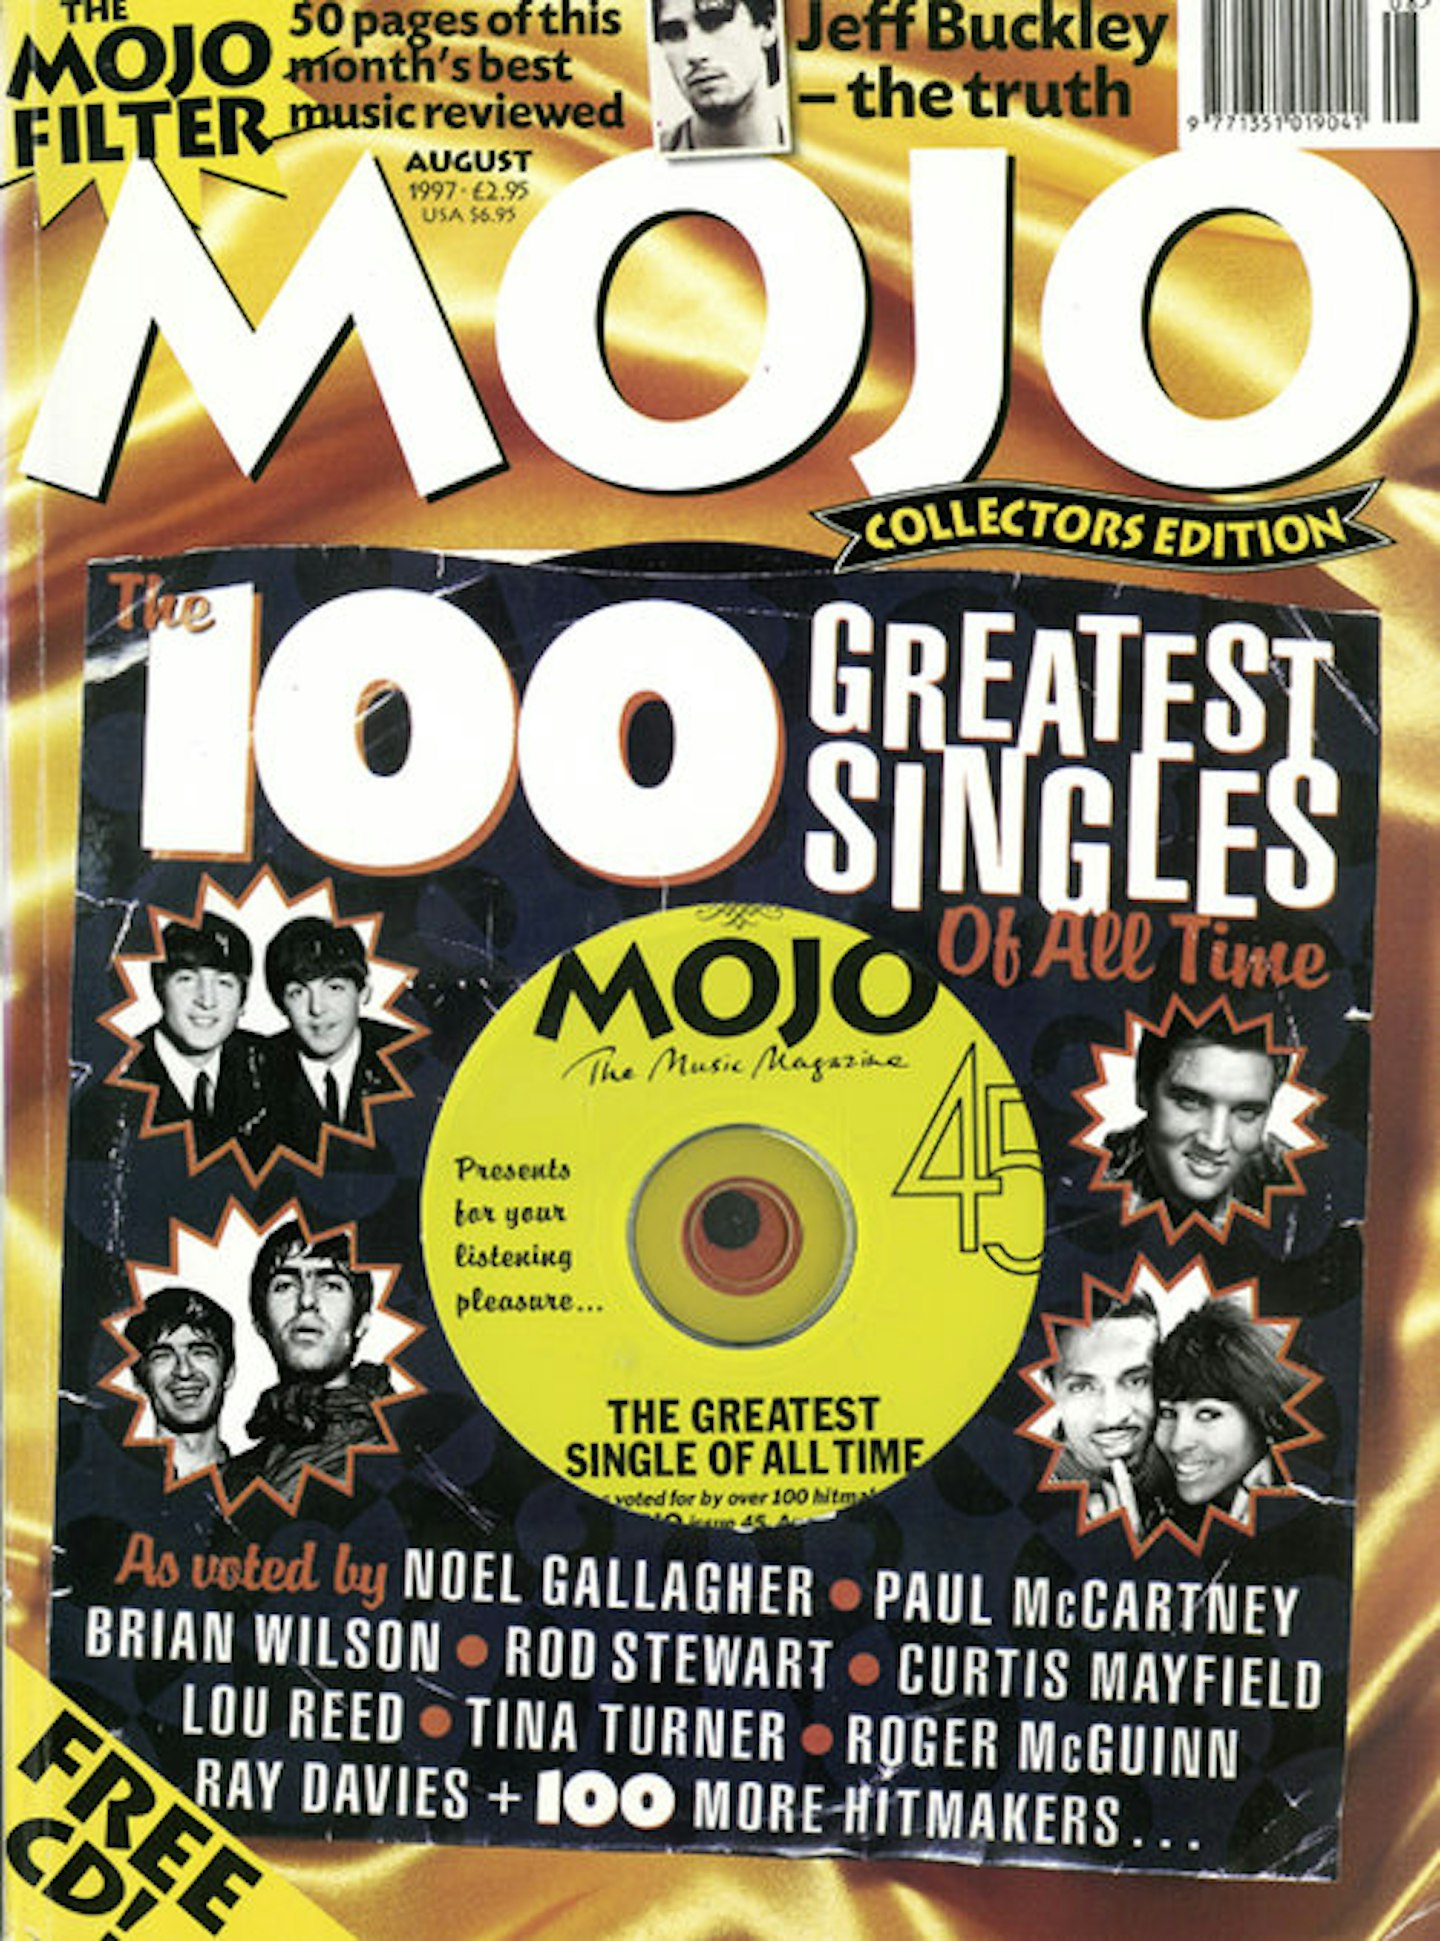 MOJO Issue 45 / August 1997